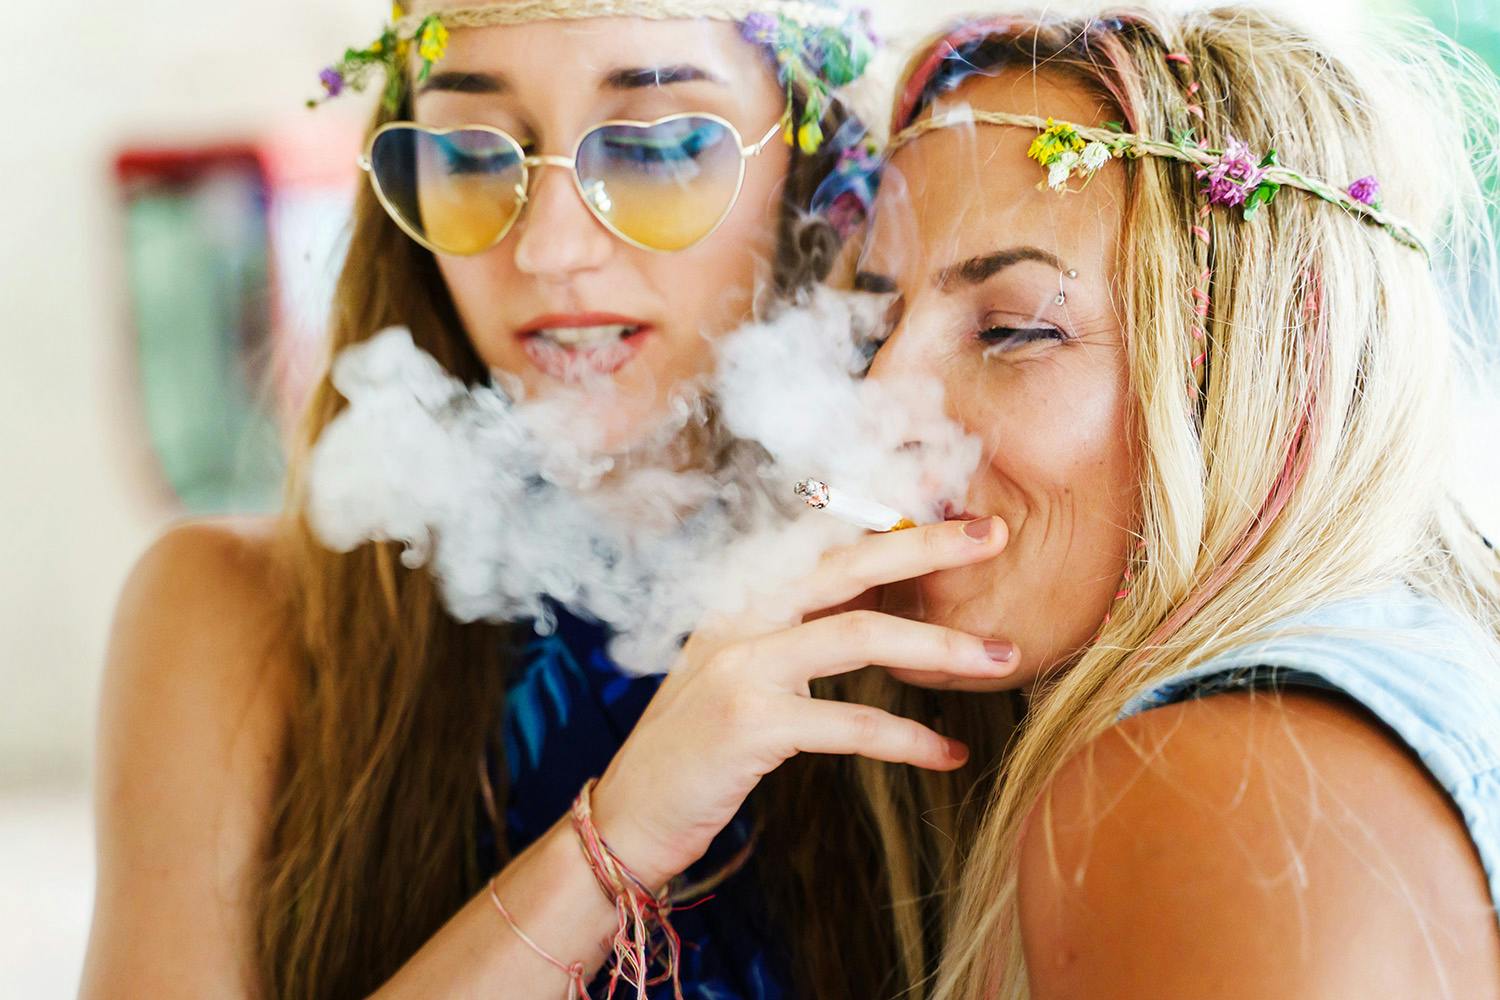 Two girls smoking and getting high together